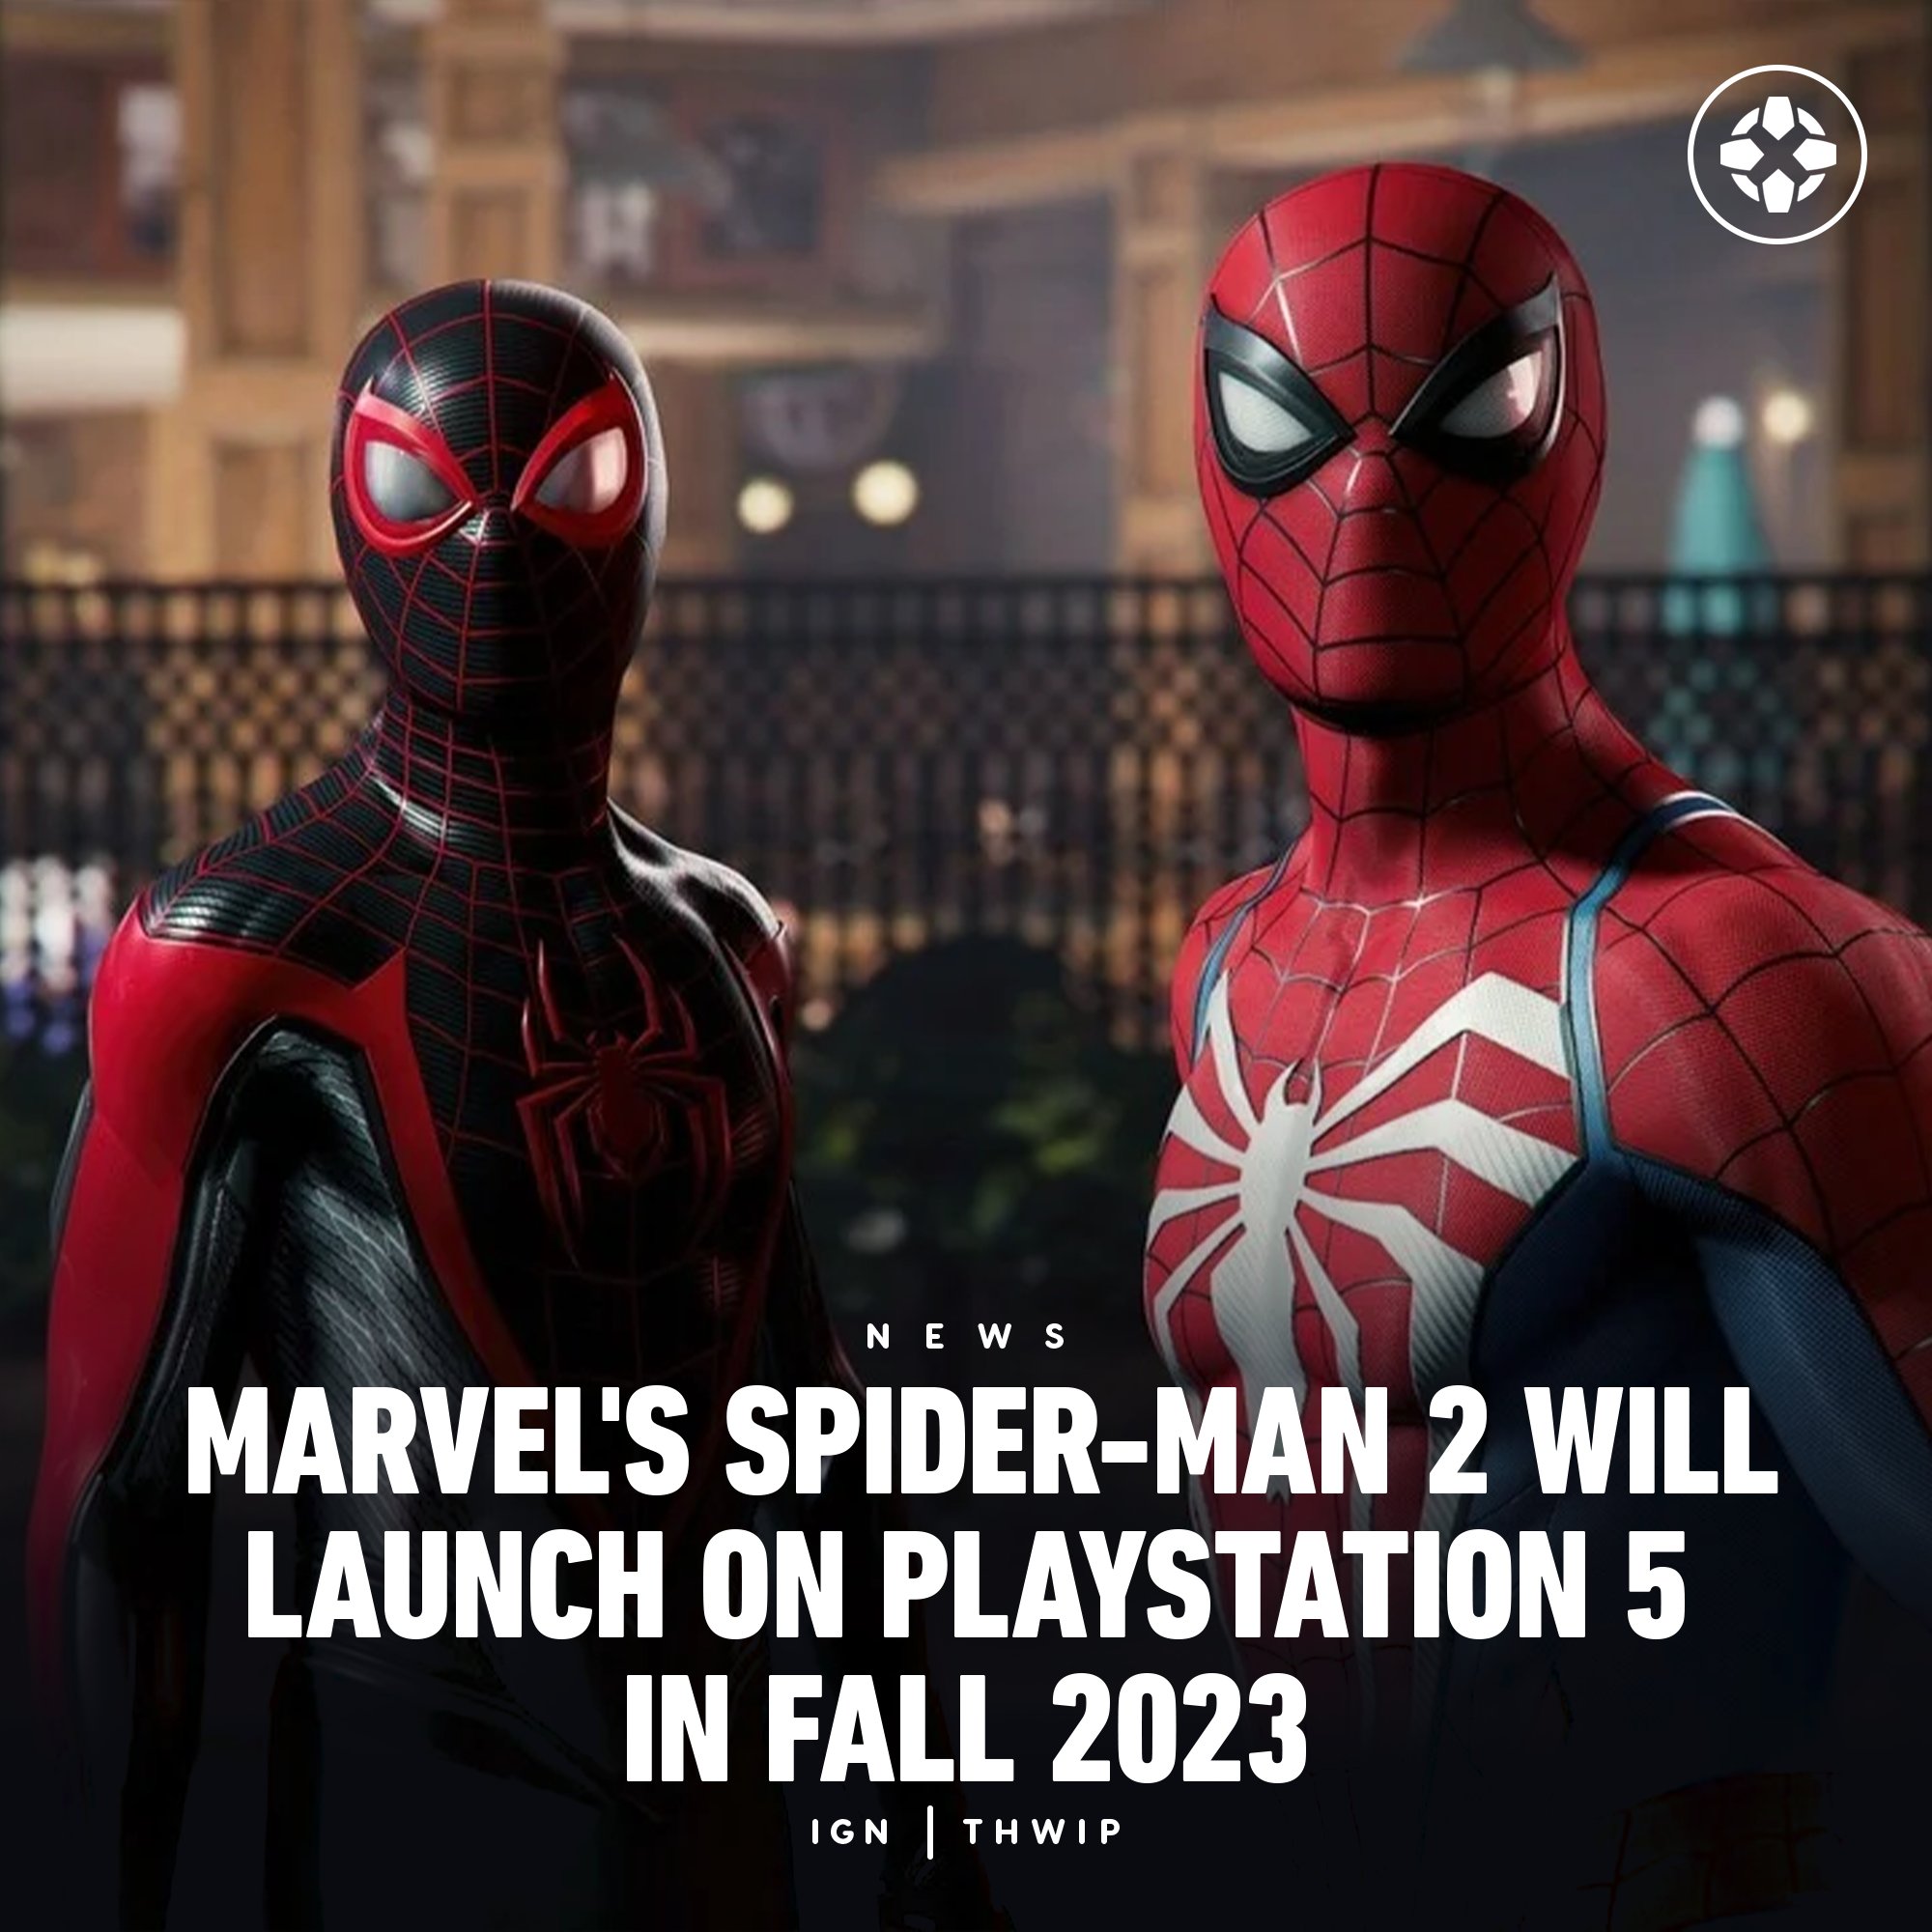 IGN on Twitter: "Revealed in a PlayStation Blog post, the long-awaited sequel 2018's Spider-Man will seemingly stick to the promised 2023 year. https://t.co/7Flrol4i1b" / Twitter